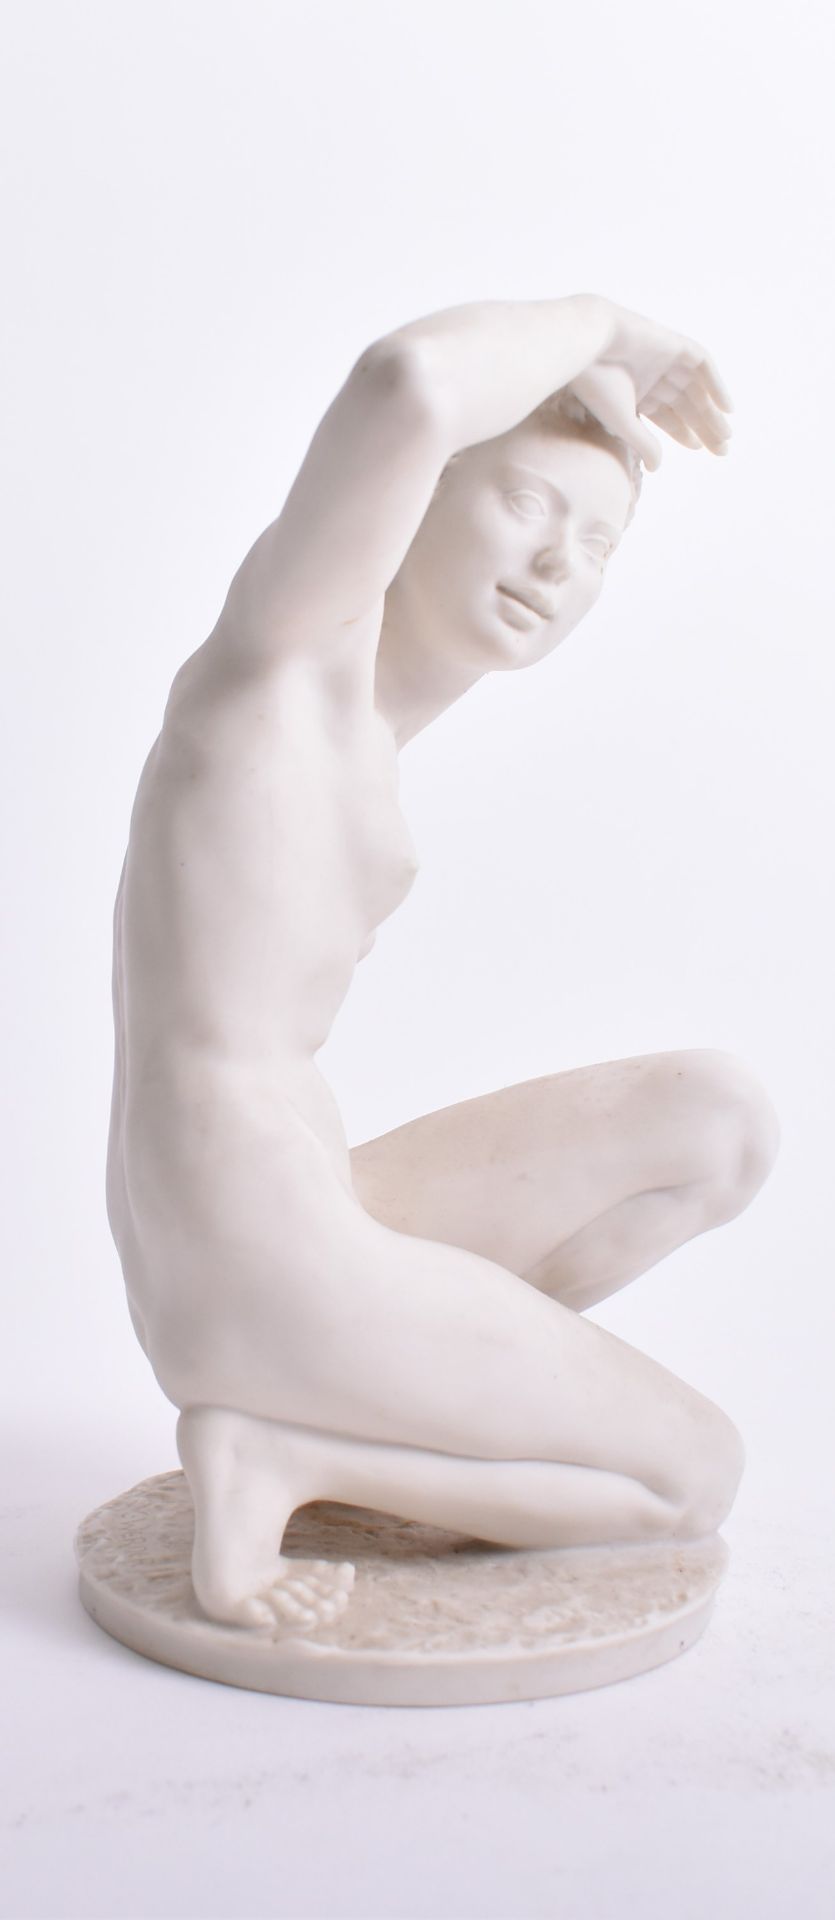 HUTSCHENREUTHER BISQUE PORCELAIN FIGURINE OF NUDE LADY - Image 2 of 5